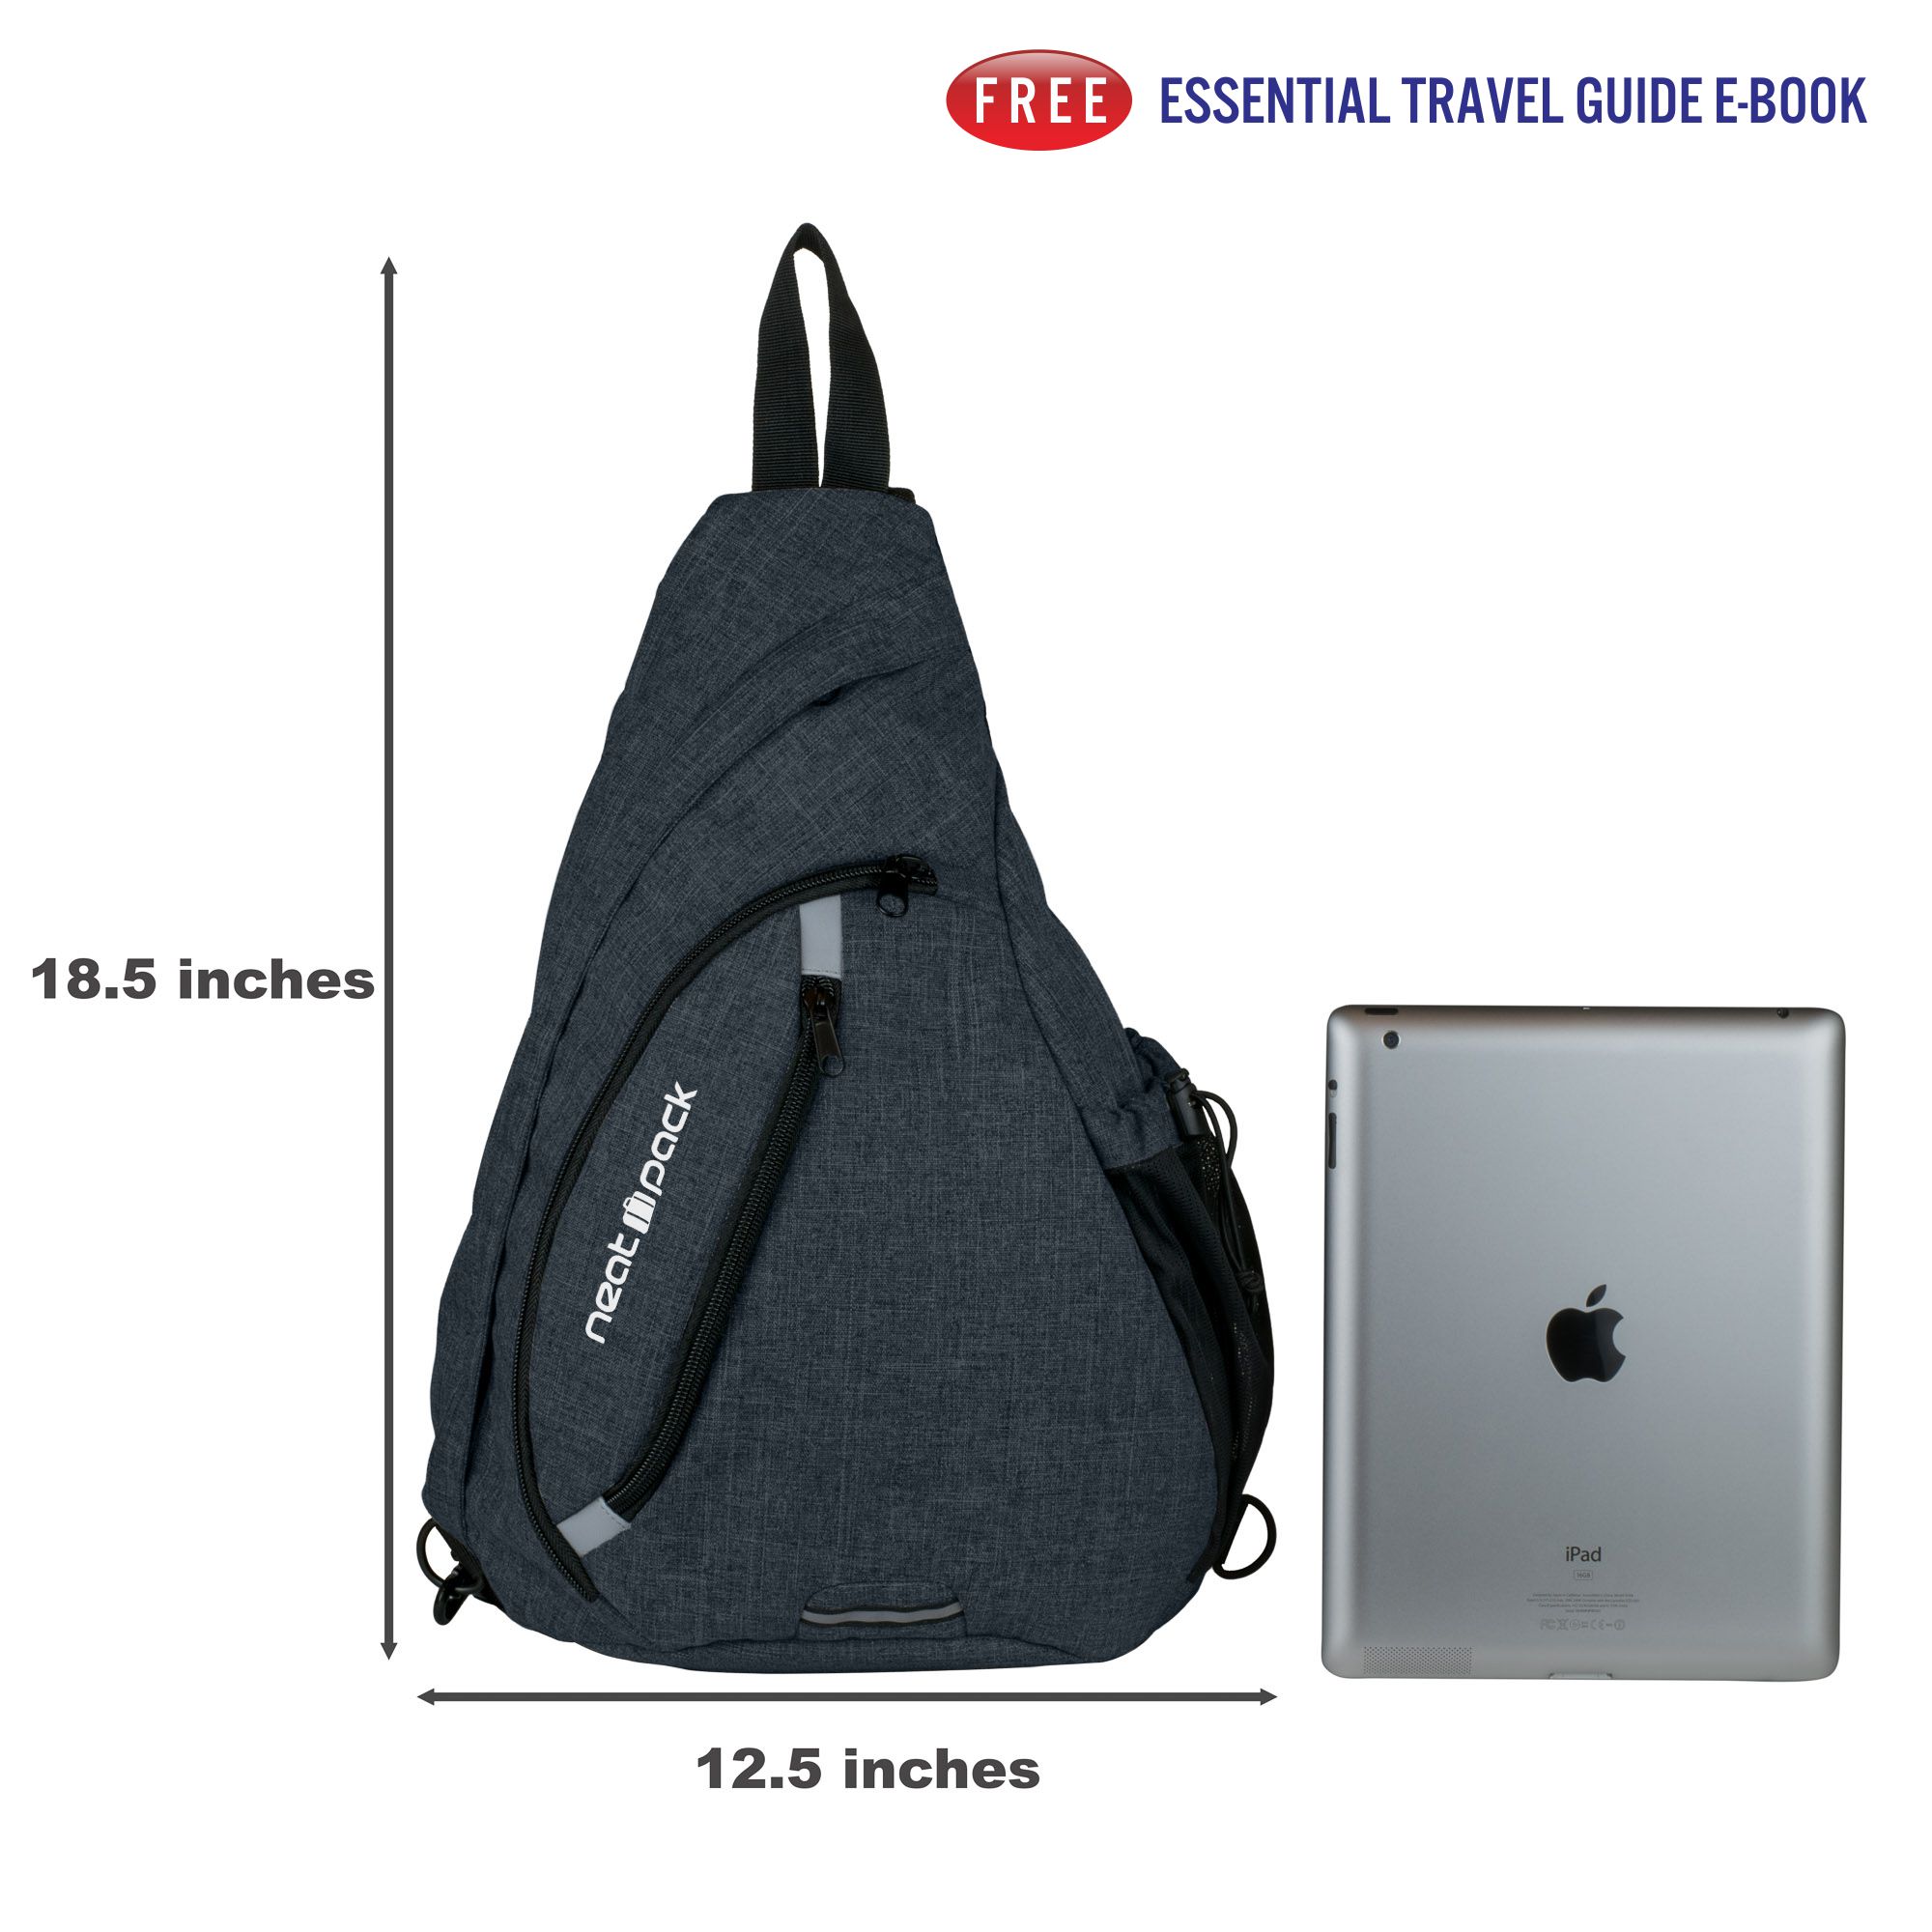 Versatile Canvas Sling Bag Backpack with RFID Security Pocket and Multi Compartments - Black - image 2 of 9